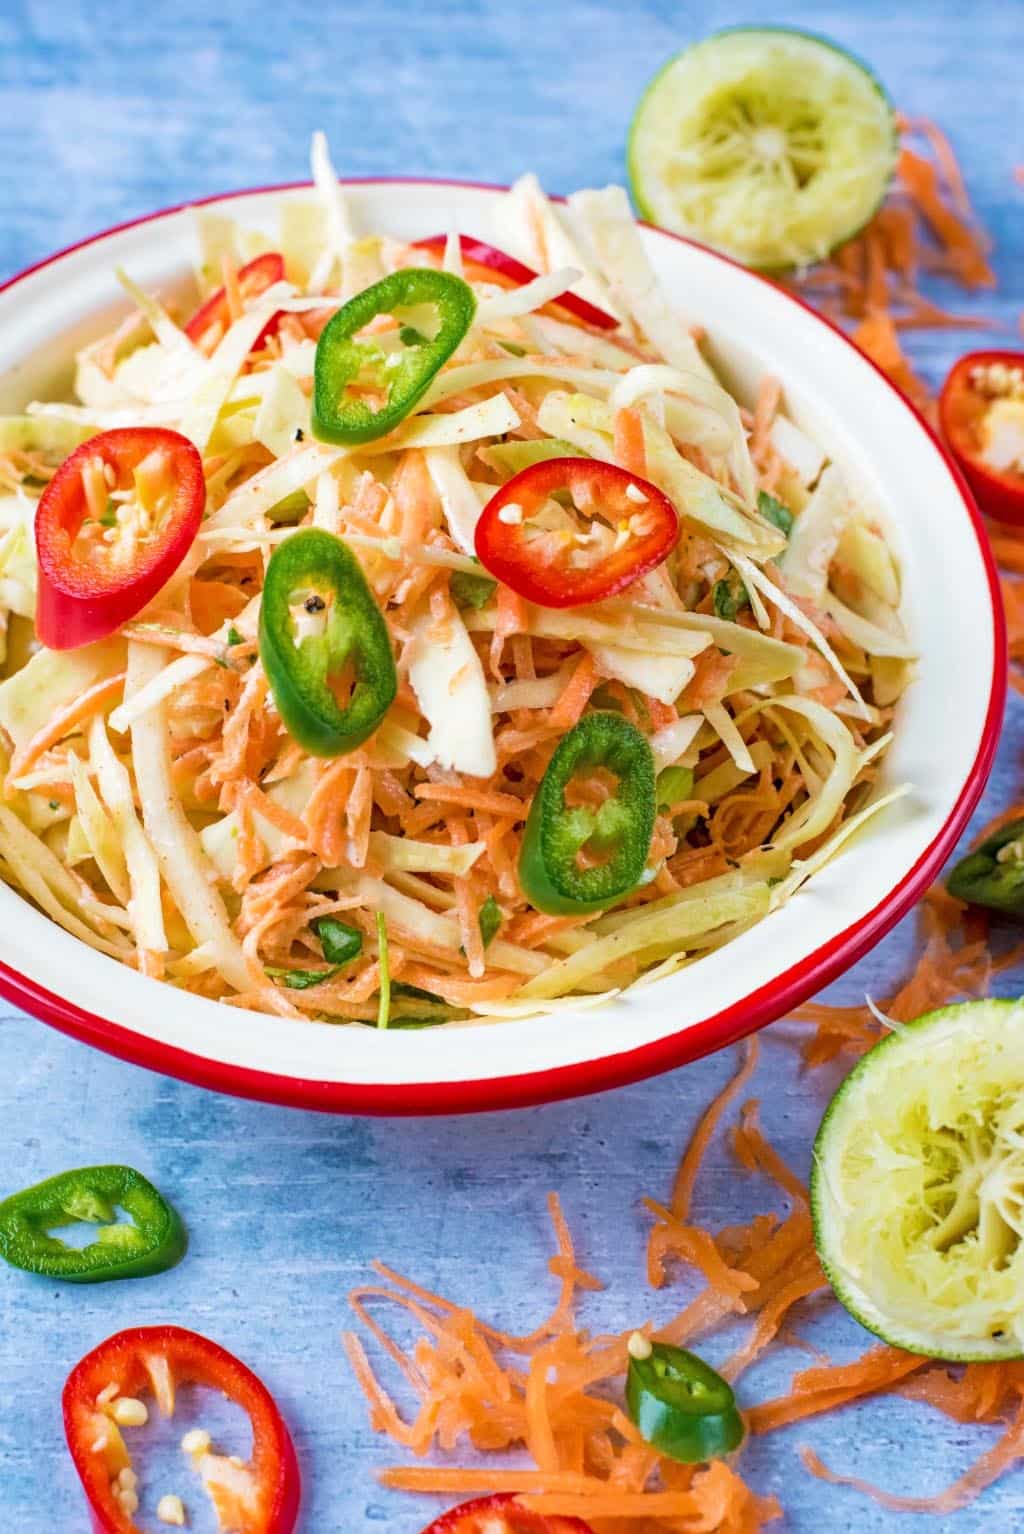 A bowl of coleslaw topped with sliced chillies.